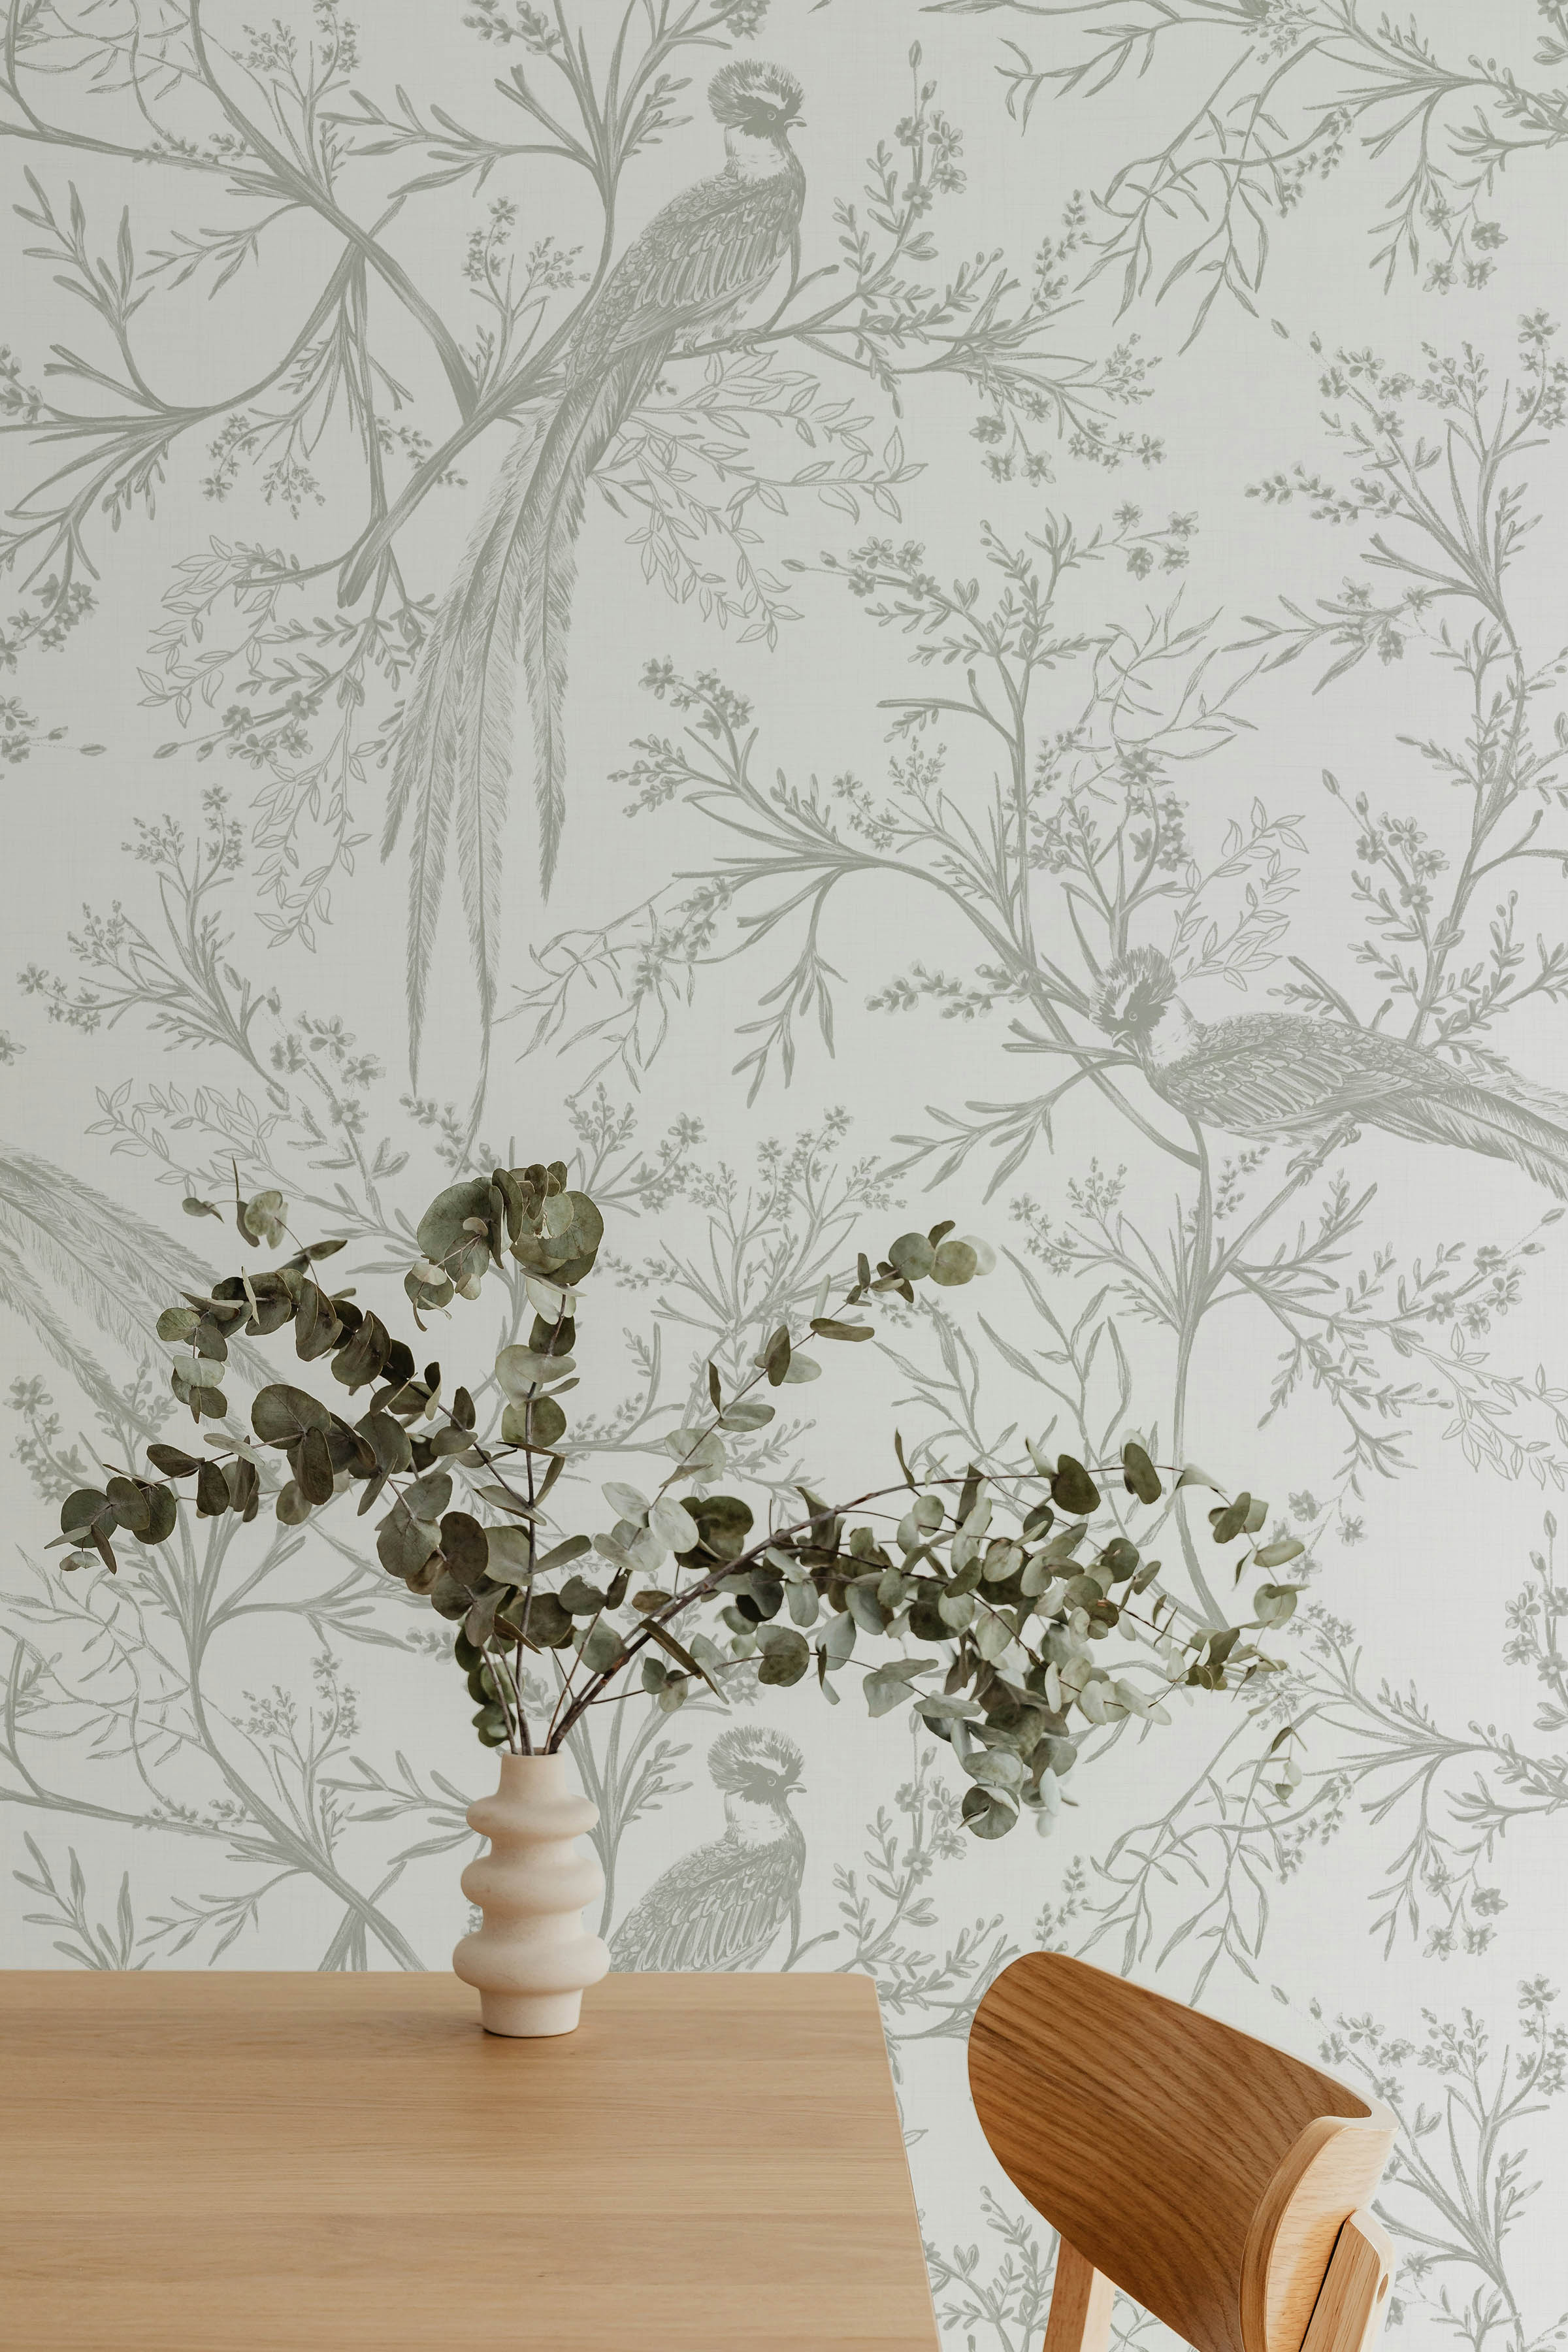 A minimalist style decor featuring the Oriental Garden Wallpaper, which beautifully complements a modern wooden table and a vase with silver dollar eucalyptus. The soft gray botanical prints against a white background add a touch of sophistication and calm to the space.